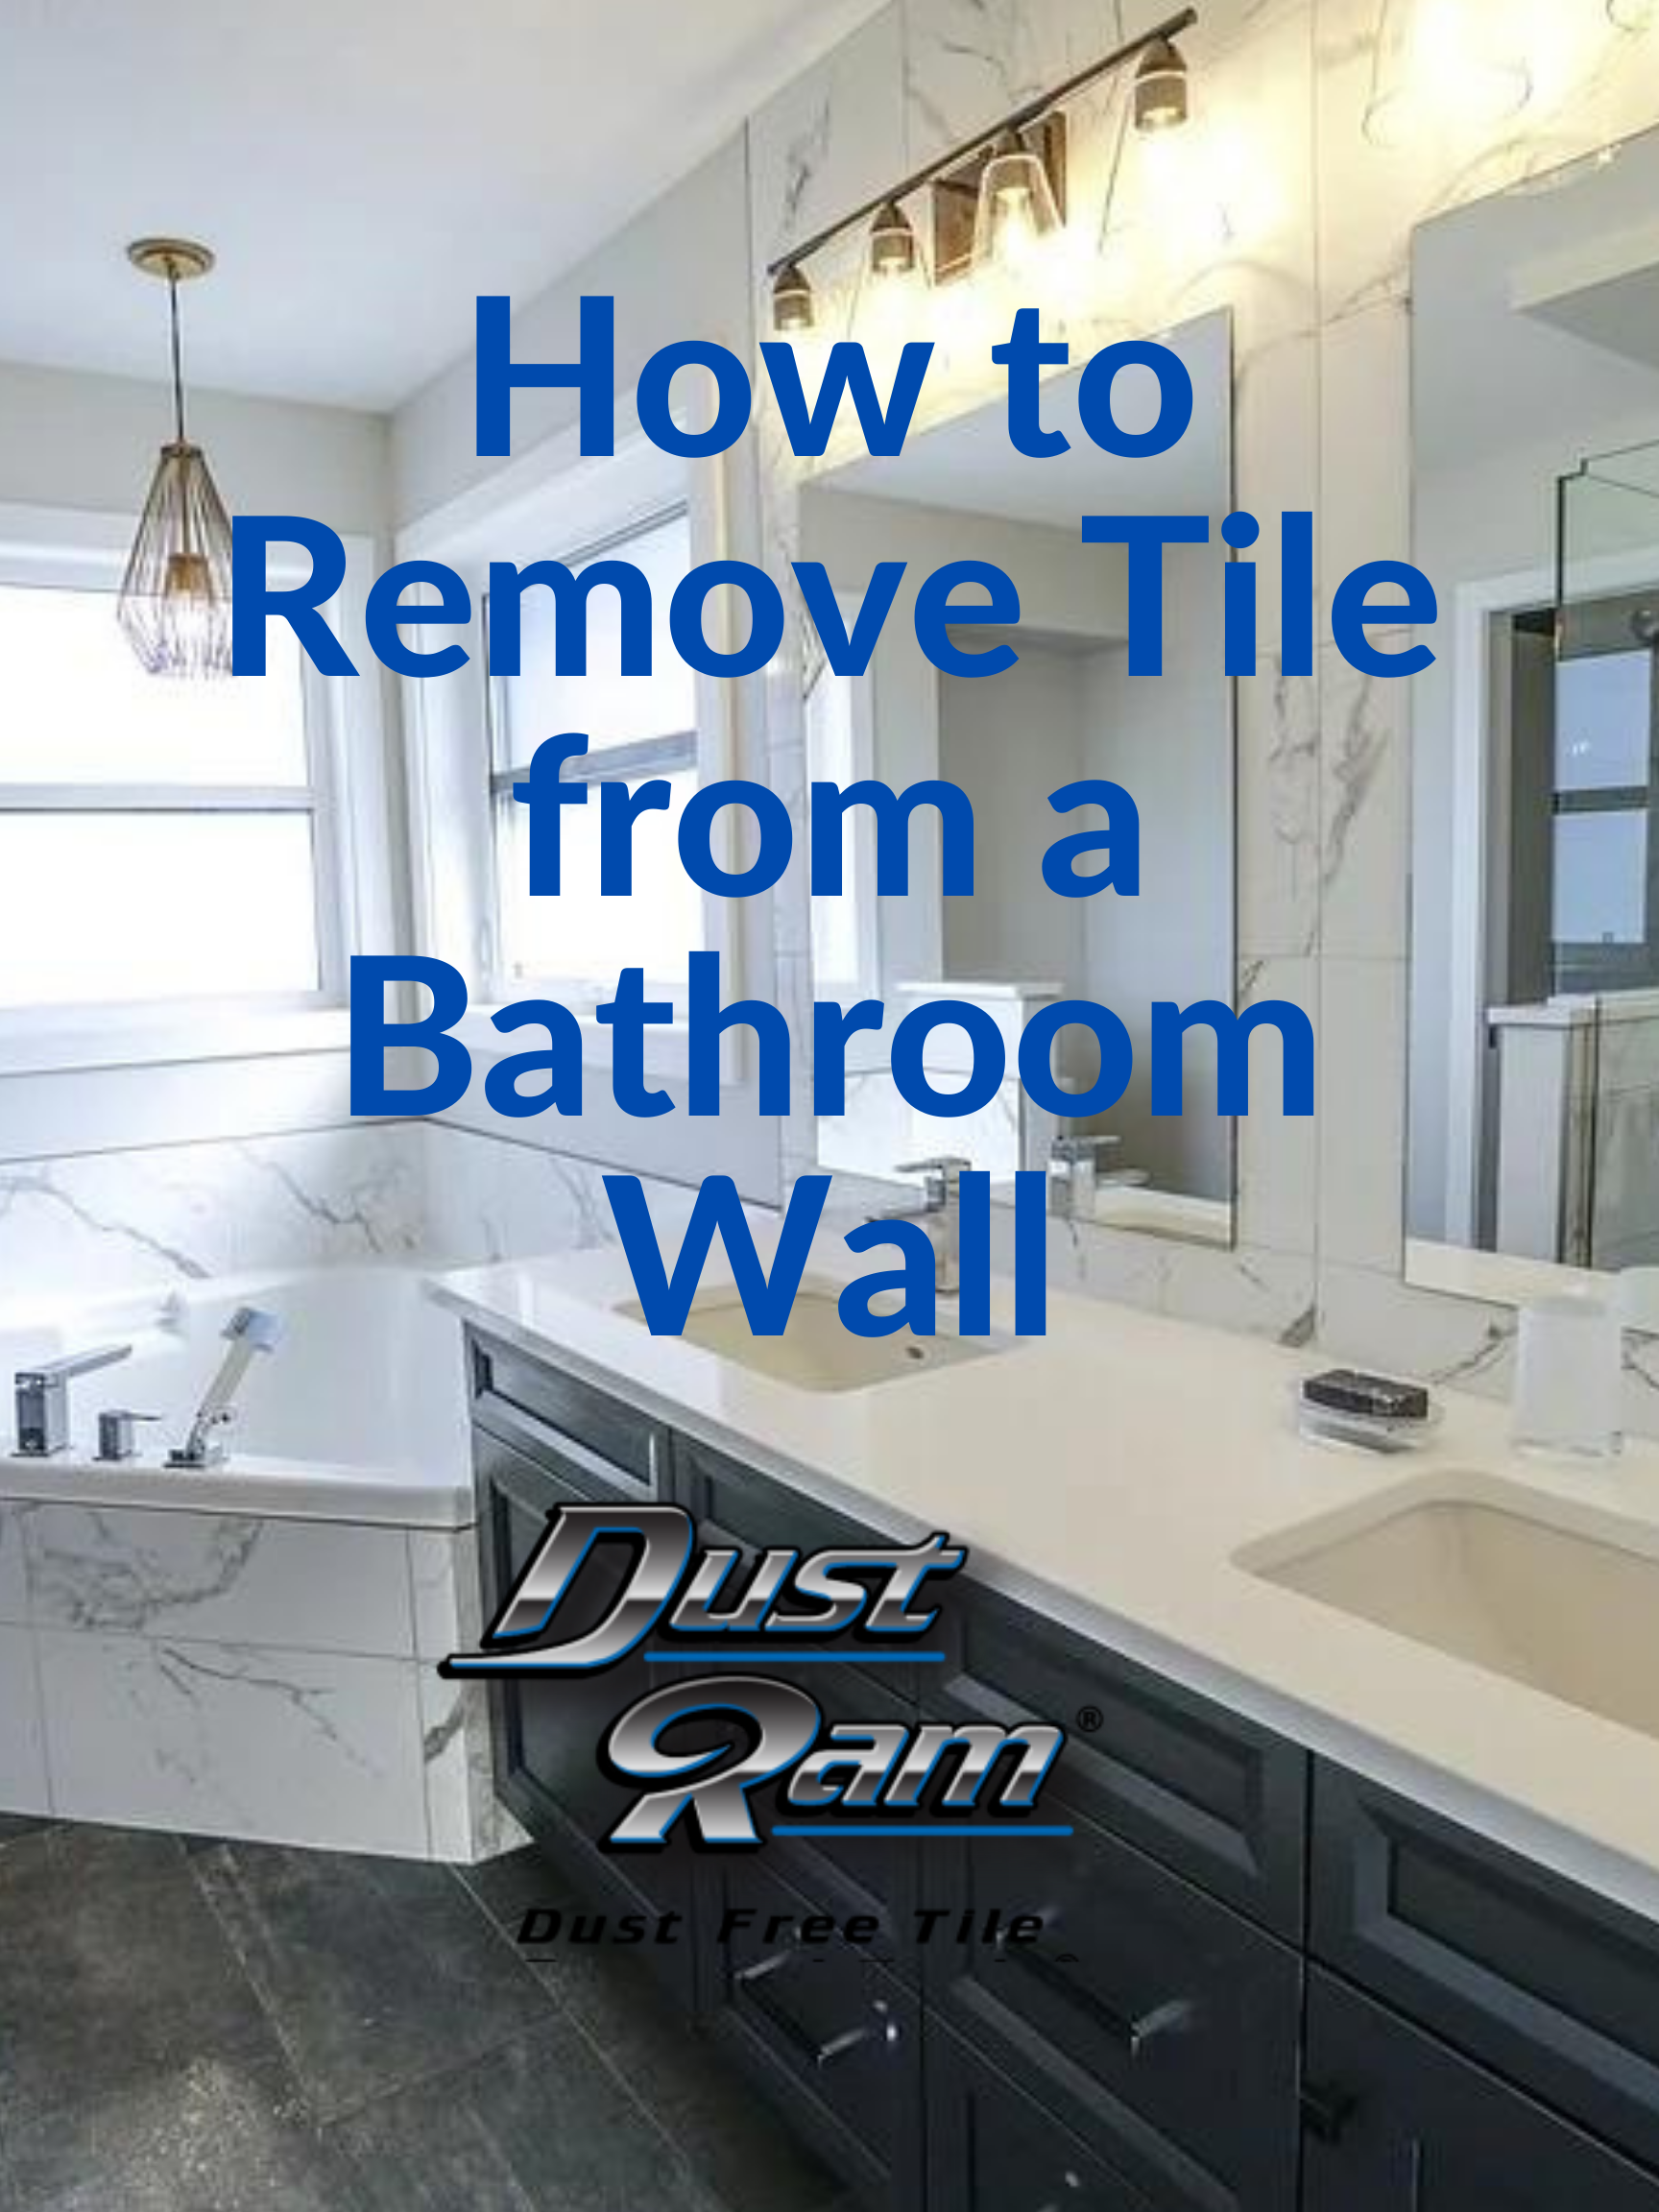 How To Remove Tile From A Bathroom Wall, How To Retile A Bathroom Countertop